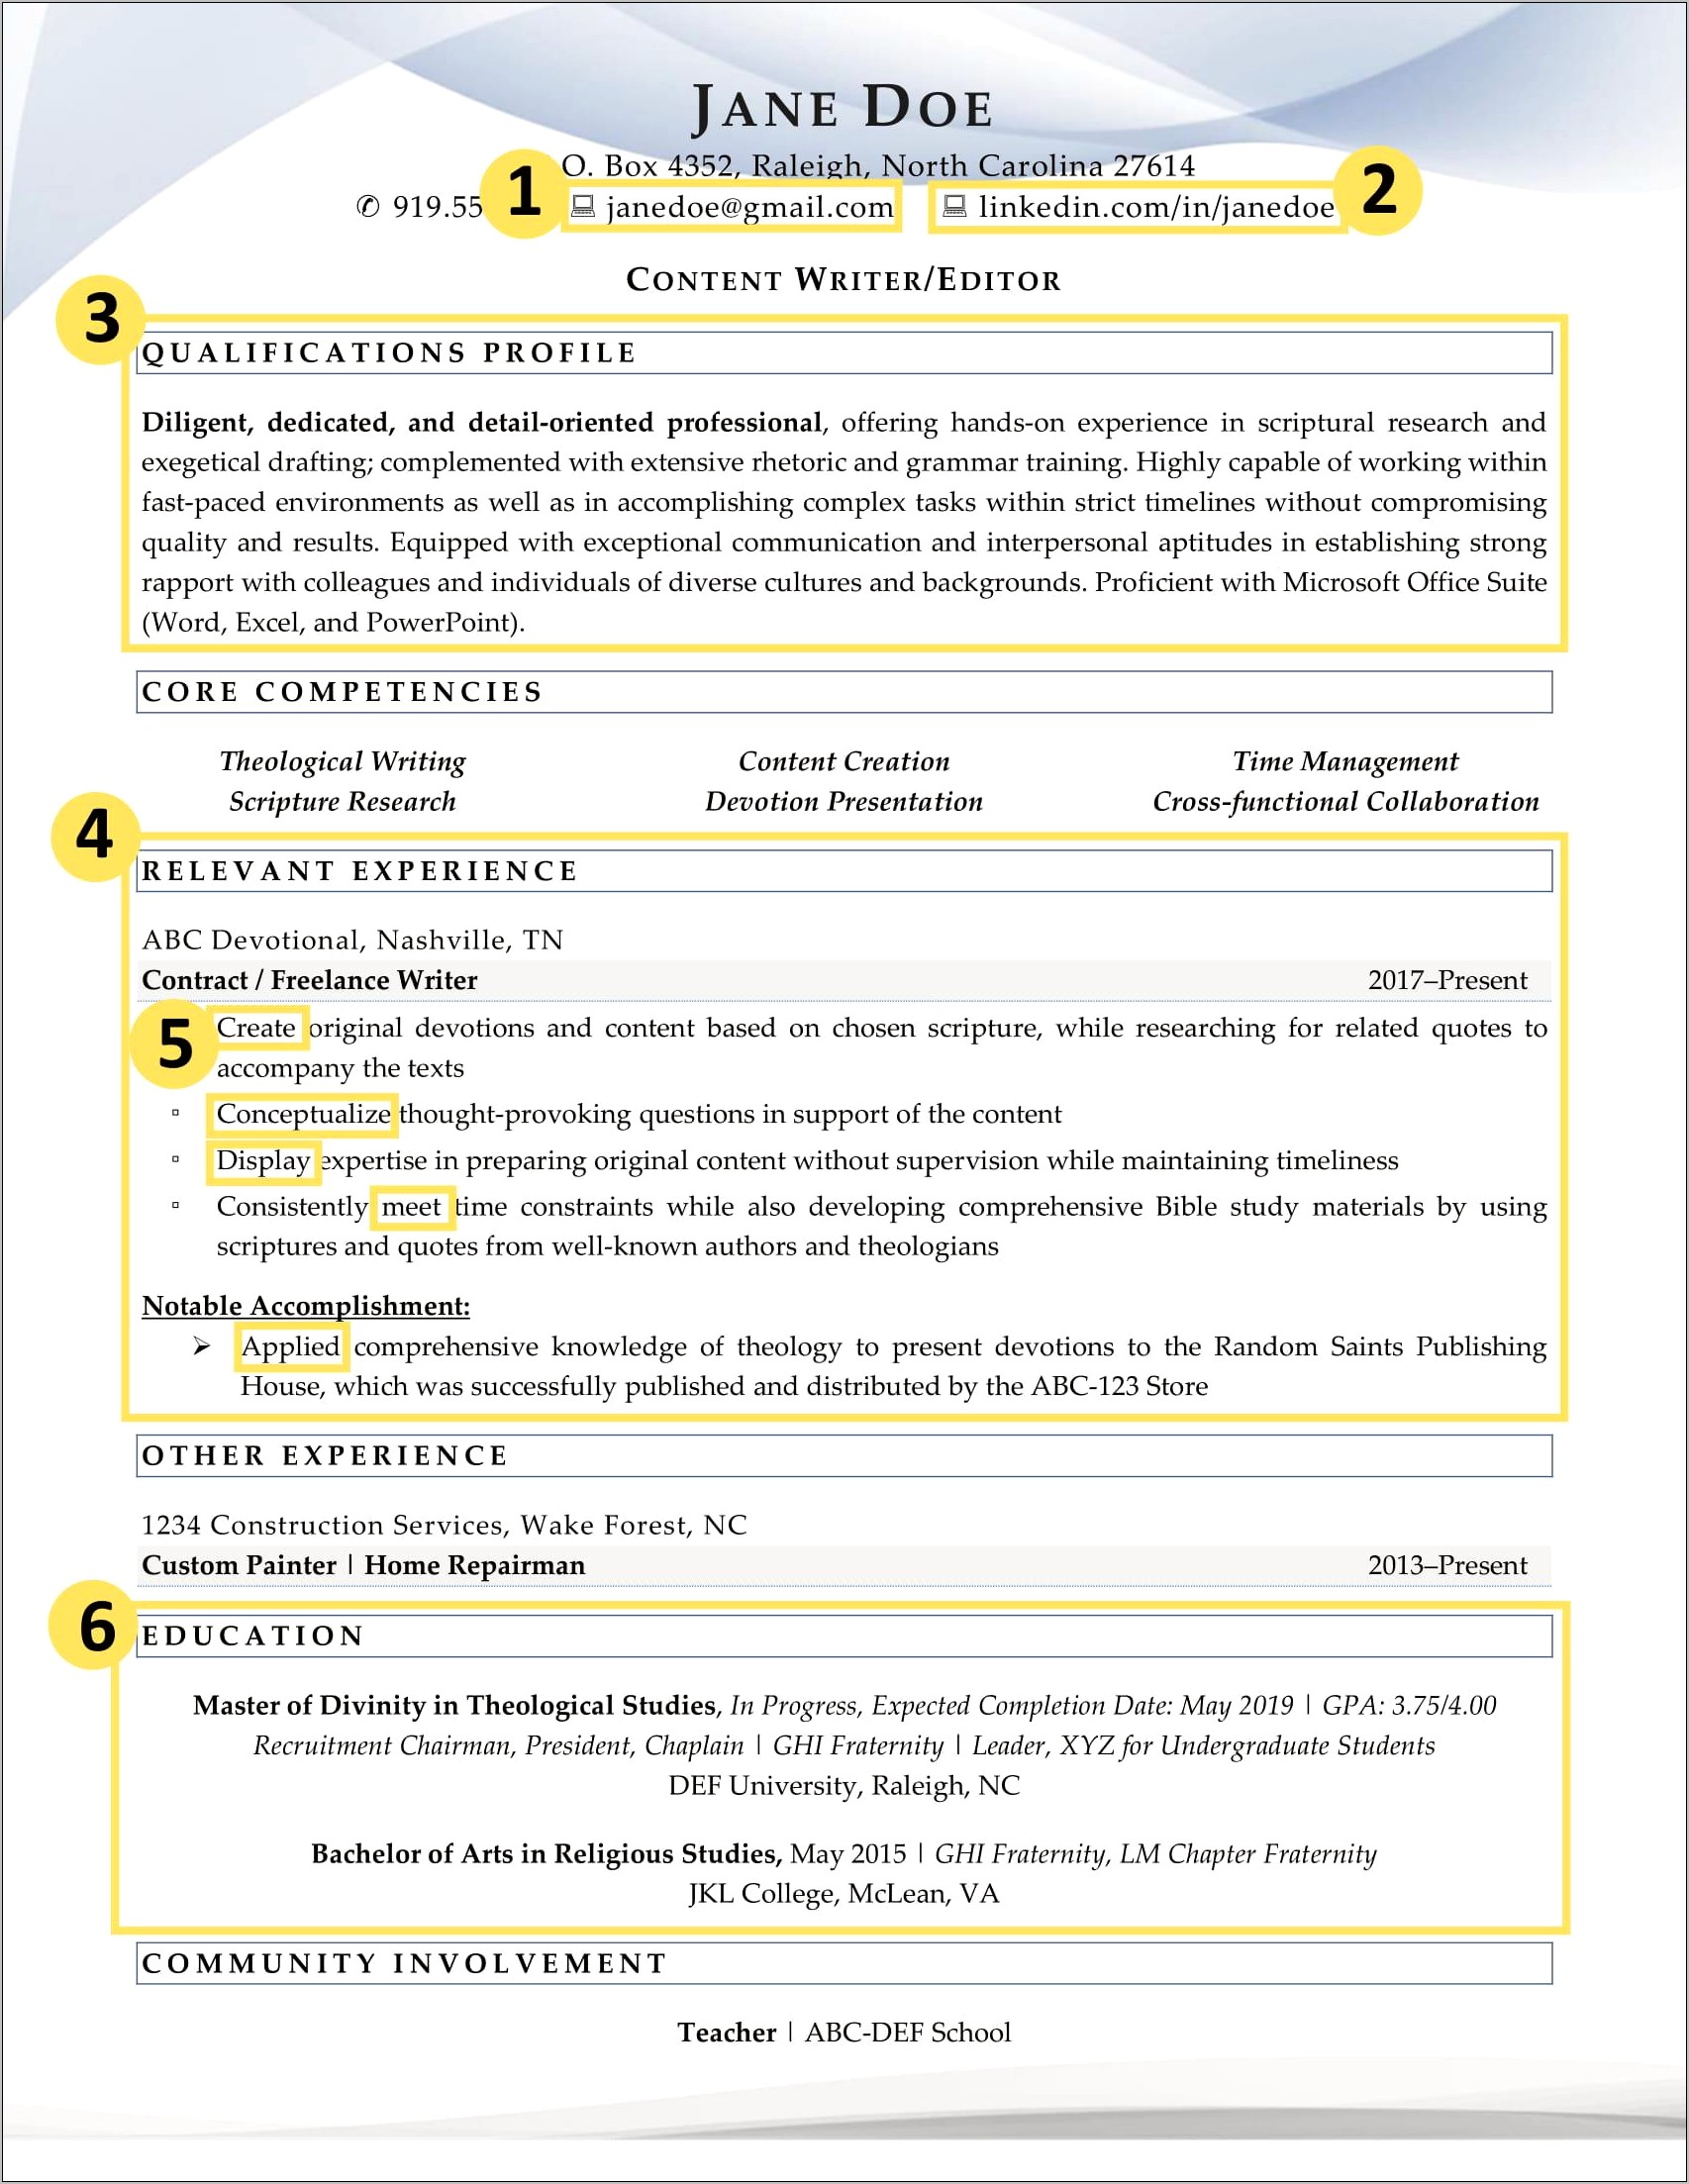 Examples Of Recent College Graduate Cybersecurity Resumes